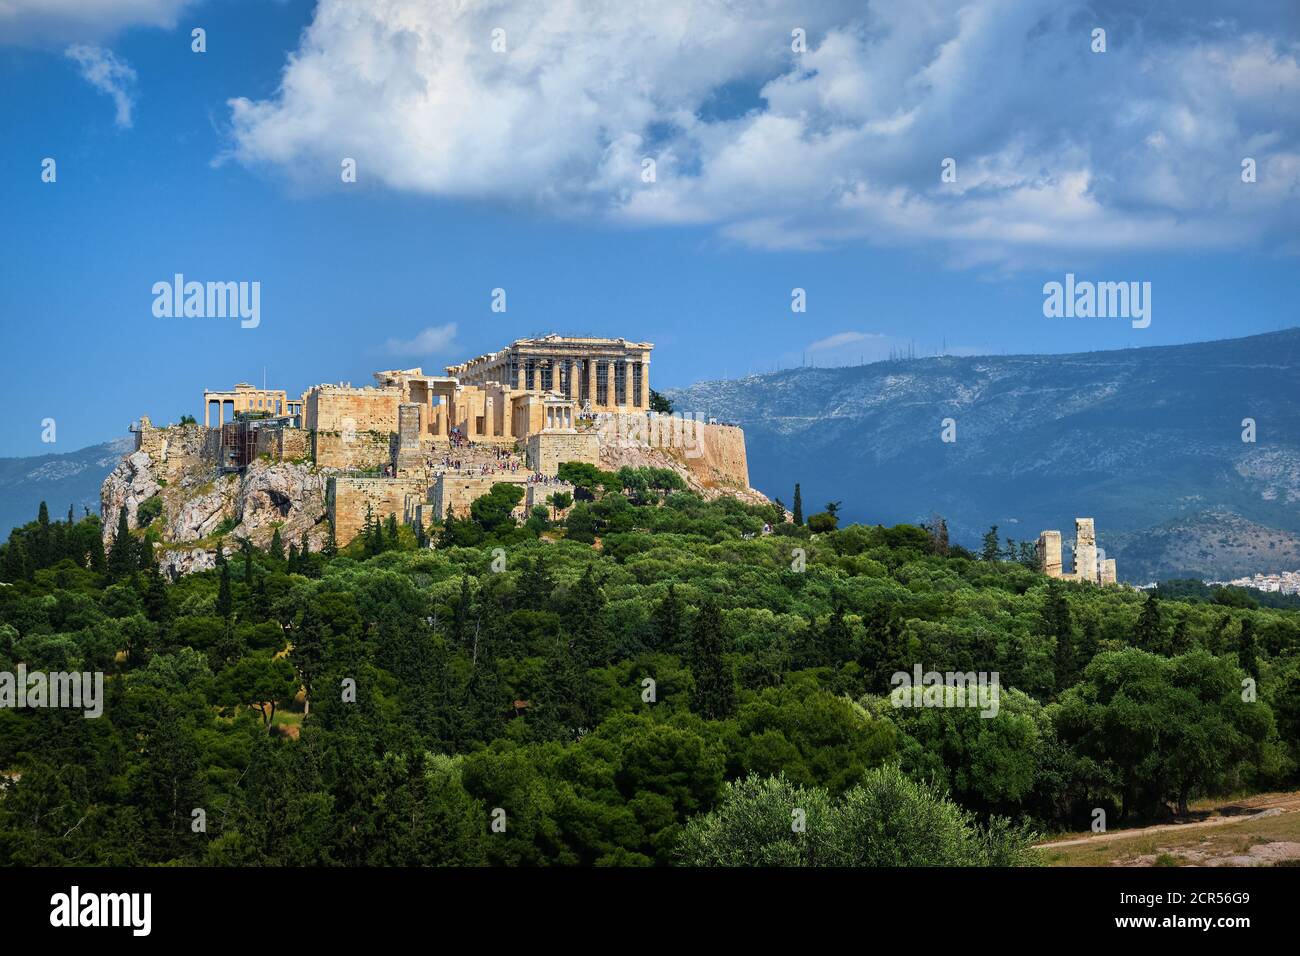 Great view of Acropolis hill from Pnyx hill on summer day with great clouds in blue sky, Athens, Greece. UNESCO world heritage. Propylaea, Parthenon. Stock Photo